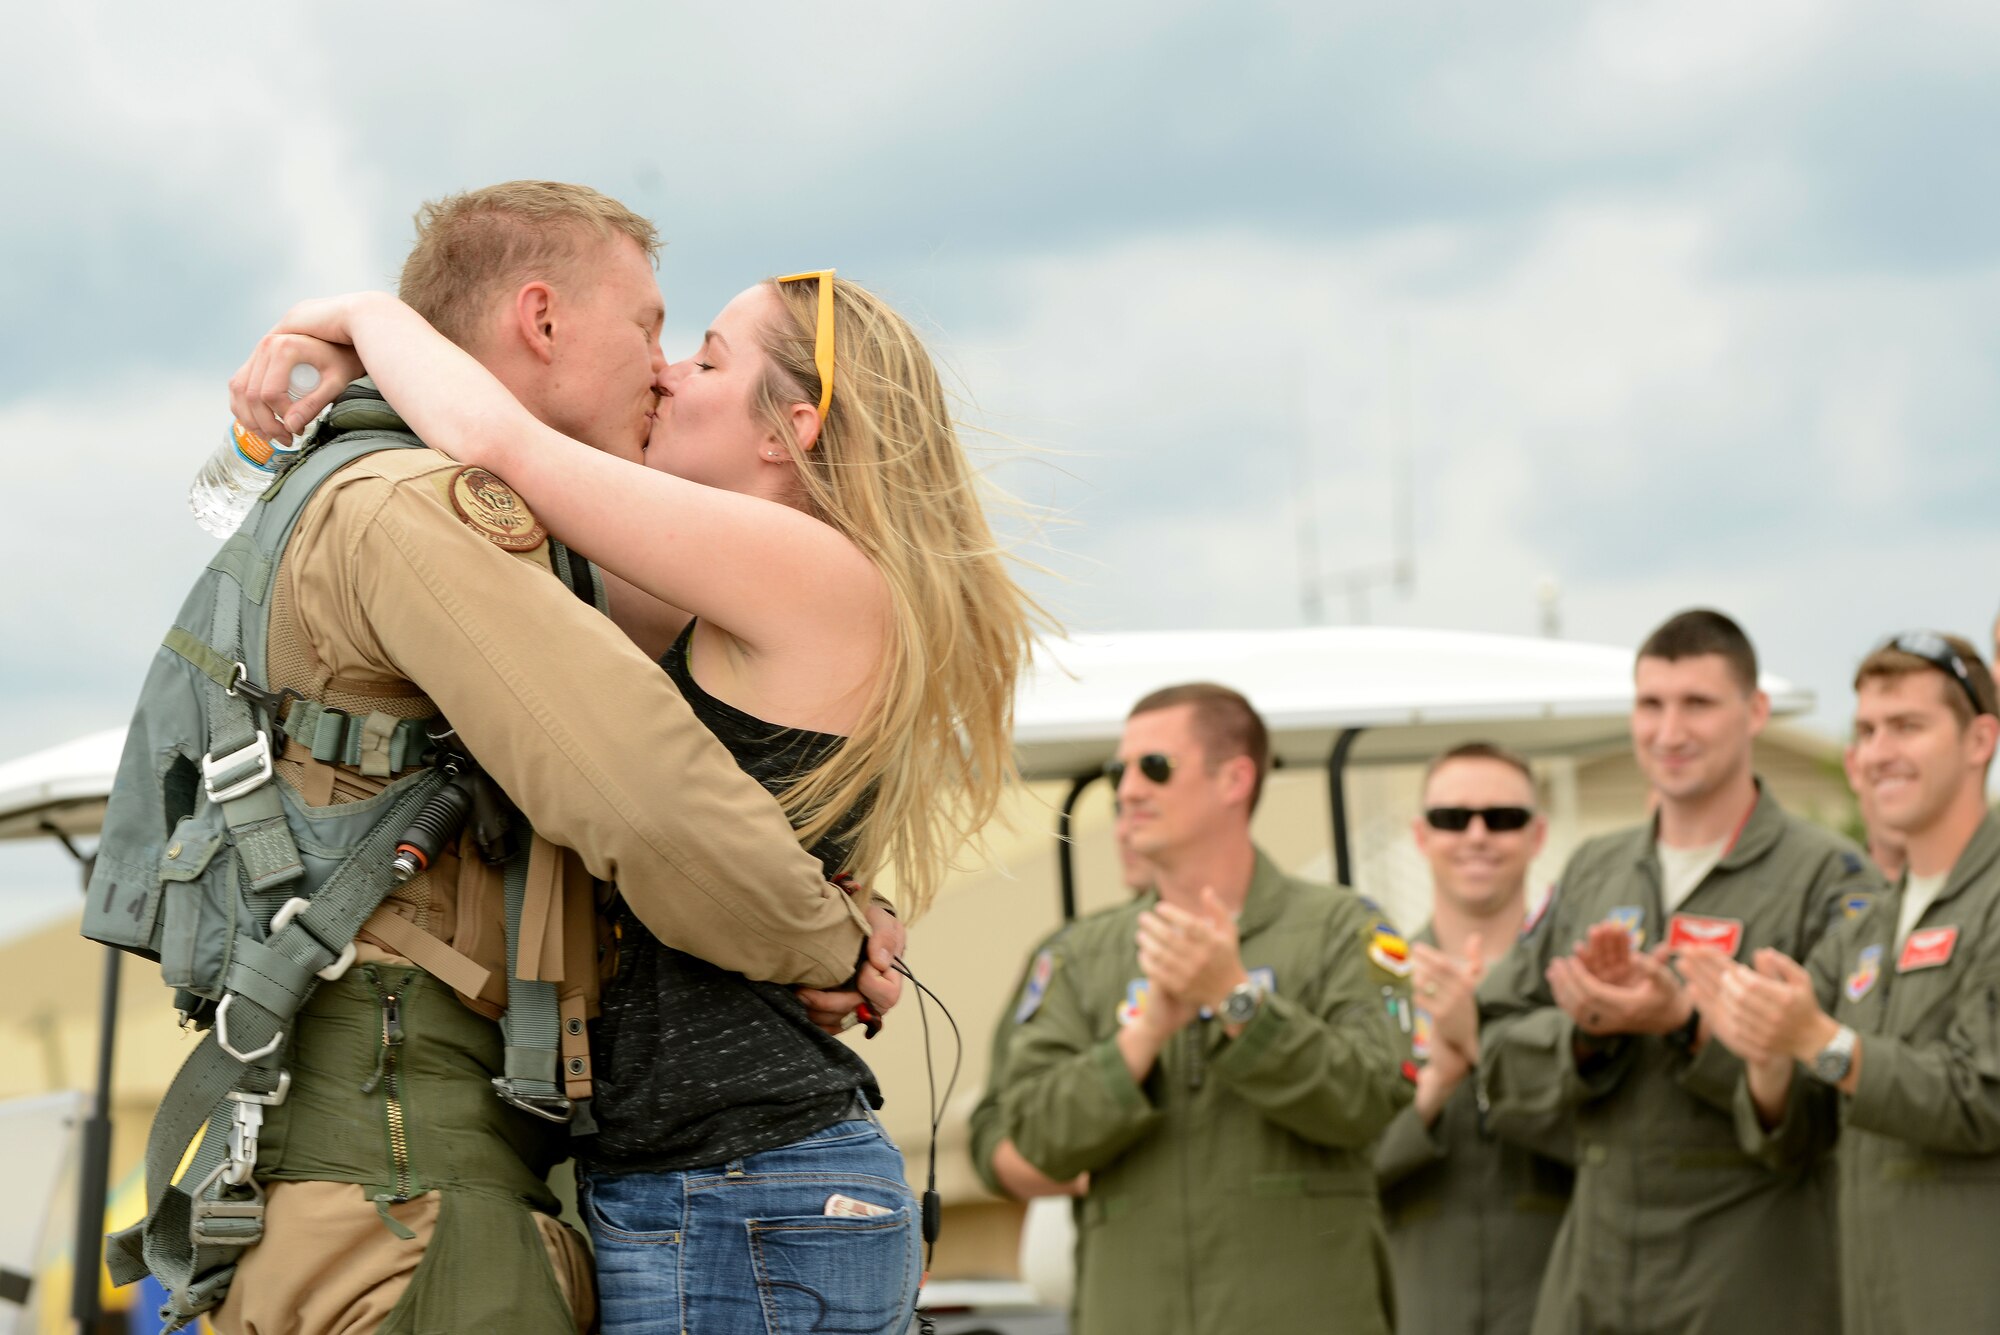 A U.S. Airman assigned to the 79th Fighter Squadron kisses his spouse after returning to Shaw Air Force Base, S.C., May 4, 2017. Airmen returned after a six-month deployment to the U.S. Central Command area of responsibility. (U.S. Air Force photo by Airman 1st Class Kathryn R.C. Reaves)